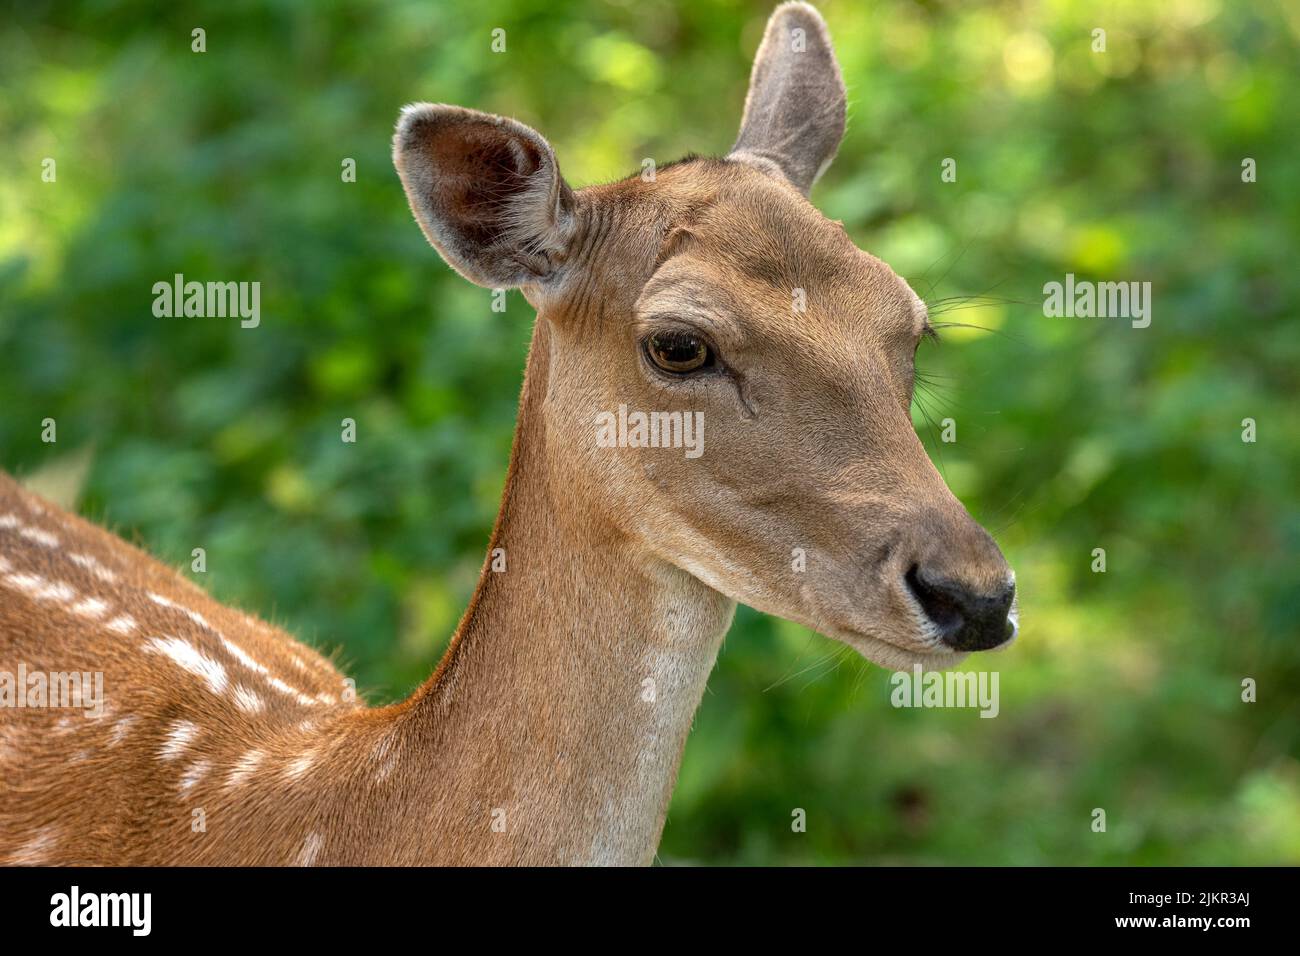 Female fallow deer with spotted summer coat of hair Stock Photo